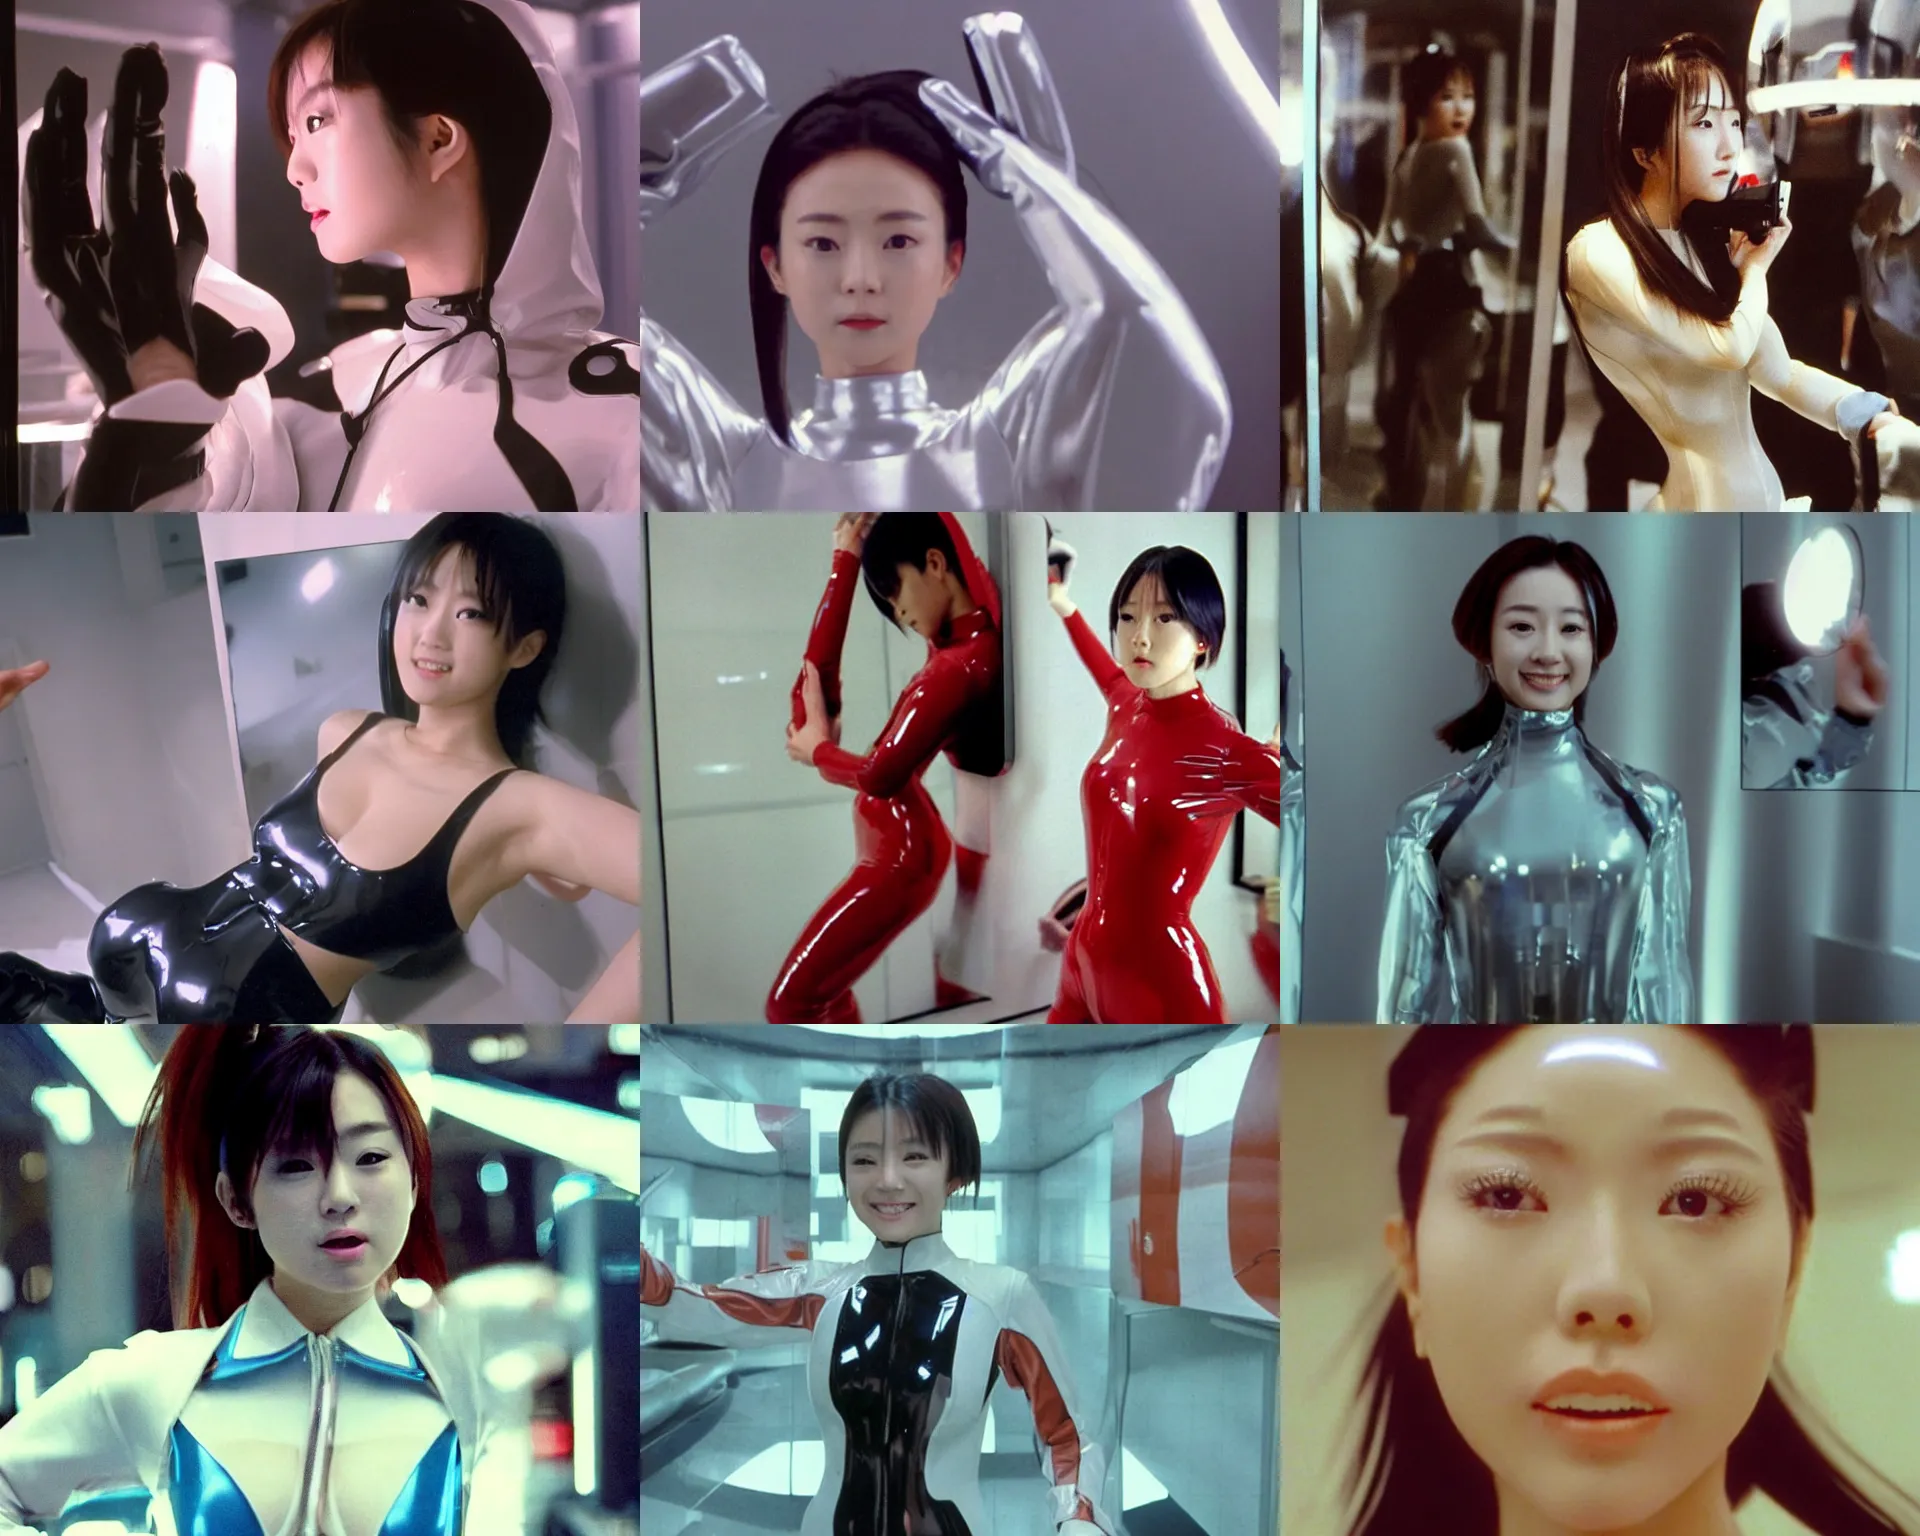 Prompt: Worksafe,clothed.1990s,unbelievably beautiful,perfect,dynamic,epic,cinematic movie shot of a semi-close-up japanese beautiful cute young J-Pop idol actress girl in latex plugsuit,reflected in giant mirror,expressing joy and posing.By a Chinese movie director.Motion,VFX,Inspirational arthouse,high budget,hollywood style,at Behance,at Netflix,Instagram filters,Photoshop,Adobe Lightroom,Adobe After Effects,taken with polaroid kodak portra